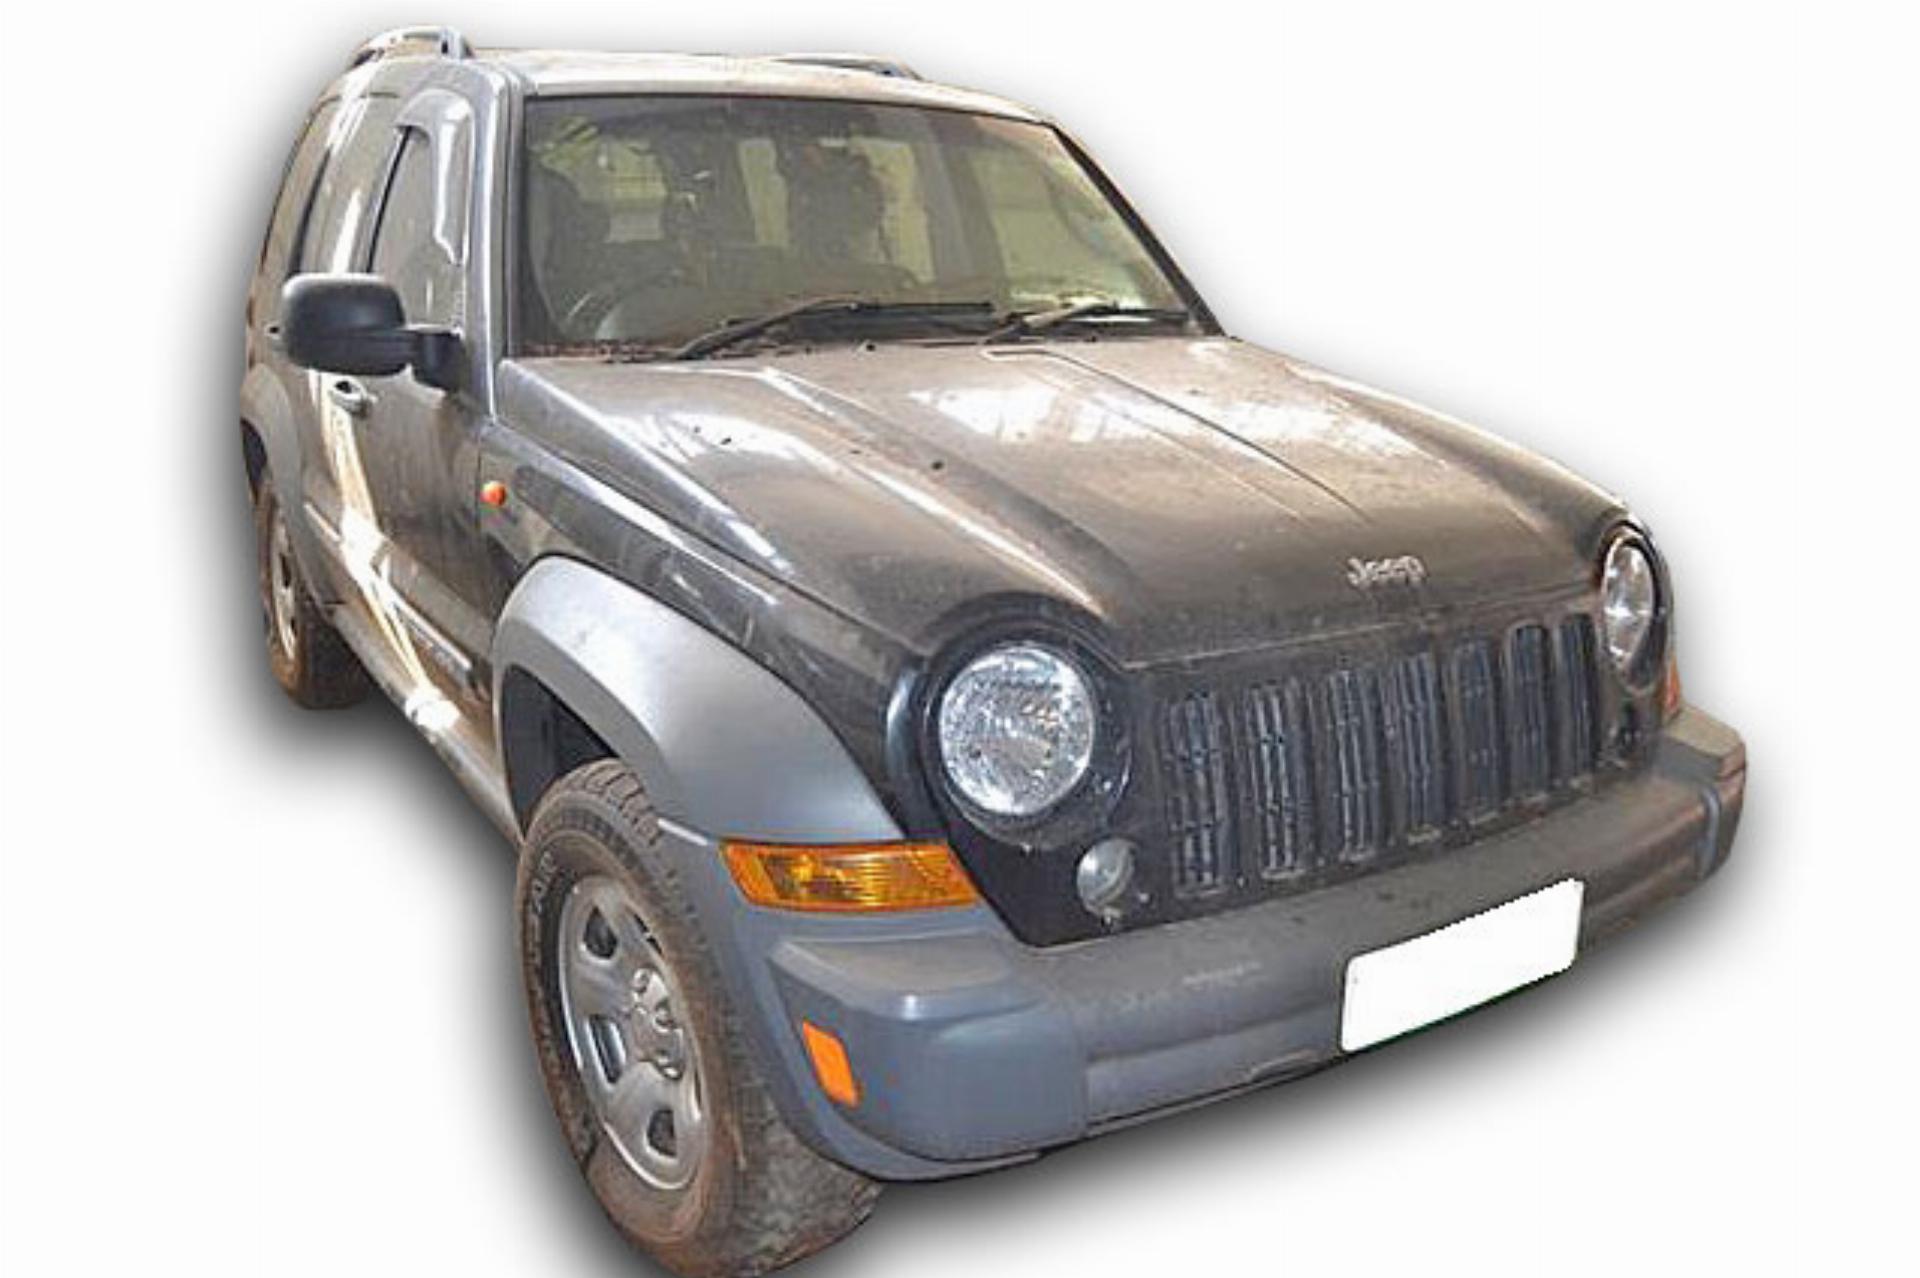 Repossessed Jeep Cherokee 2.8 CRD 4X4 A/T 2006 on auction